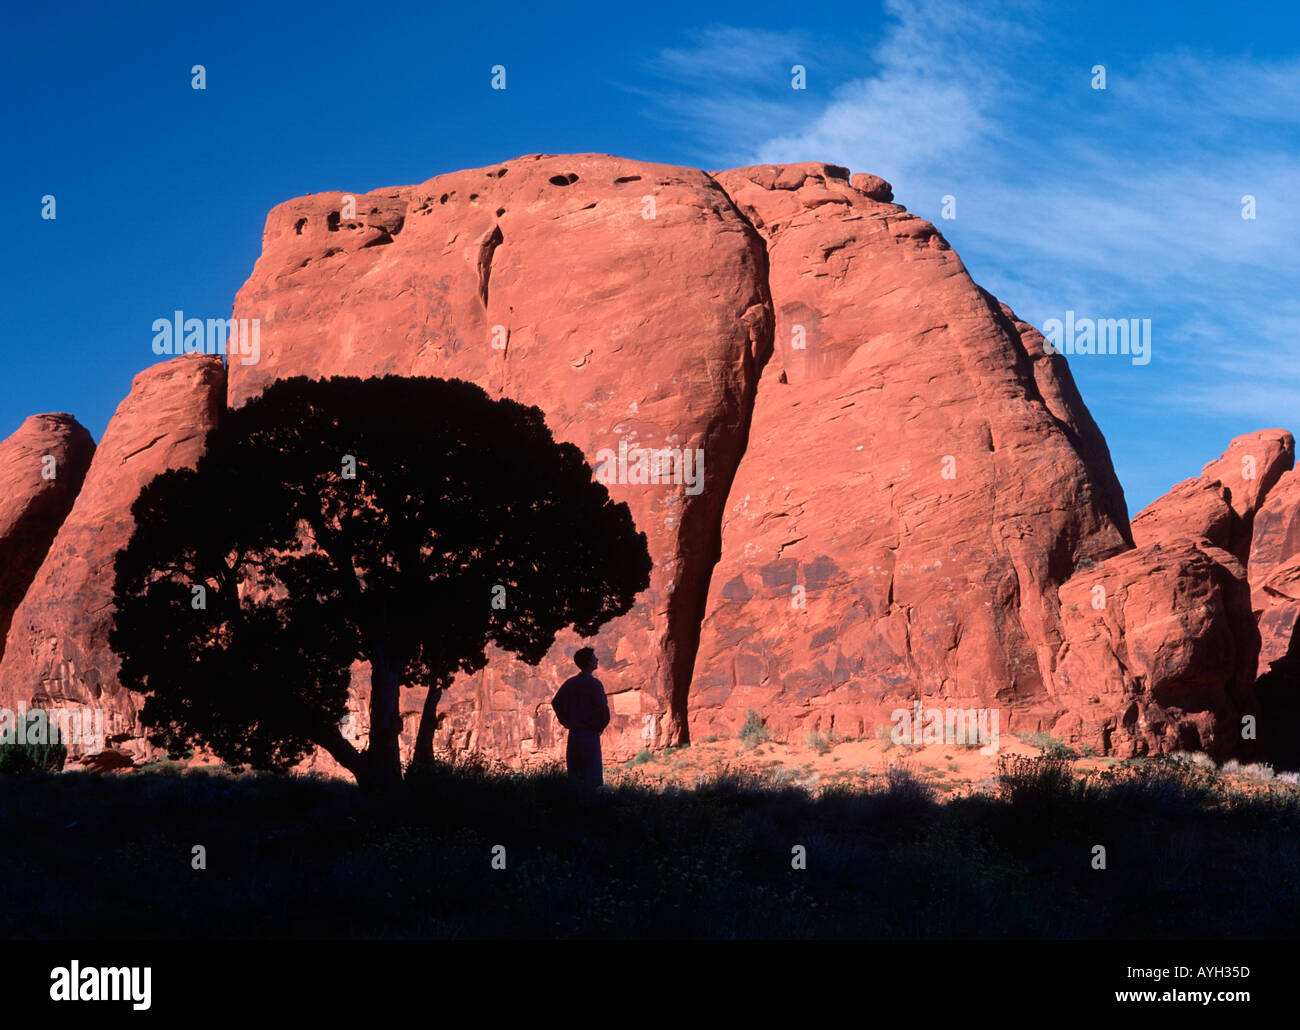 Hiker rests beneath a shade tree in front of a monolithic sandstone rock formation in Monument Valley on the Arizona Utah border Stock Photo